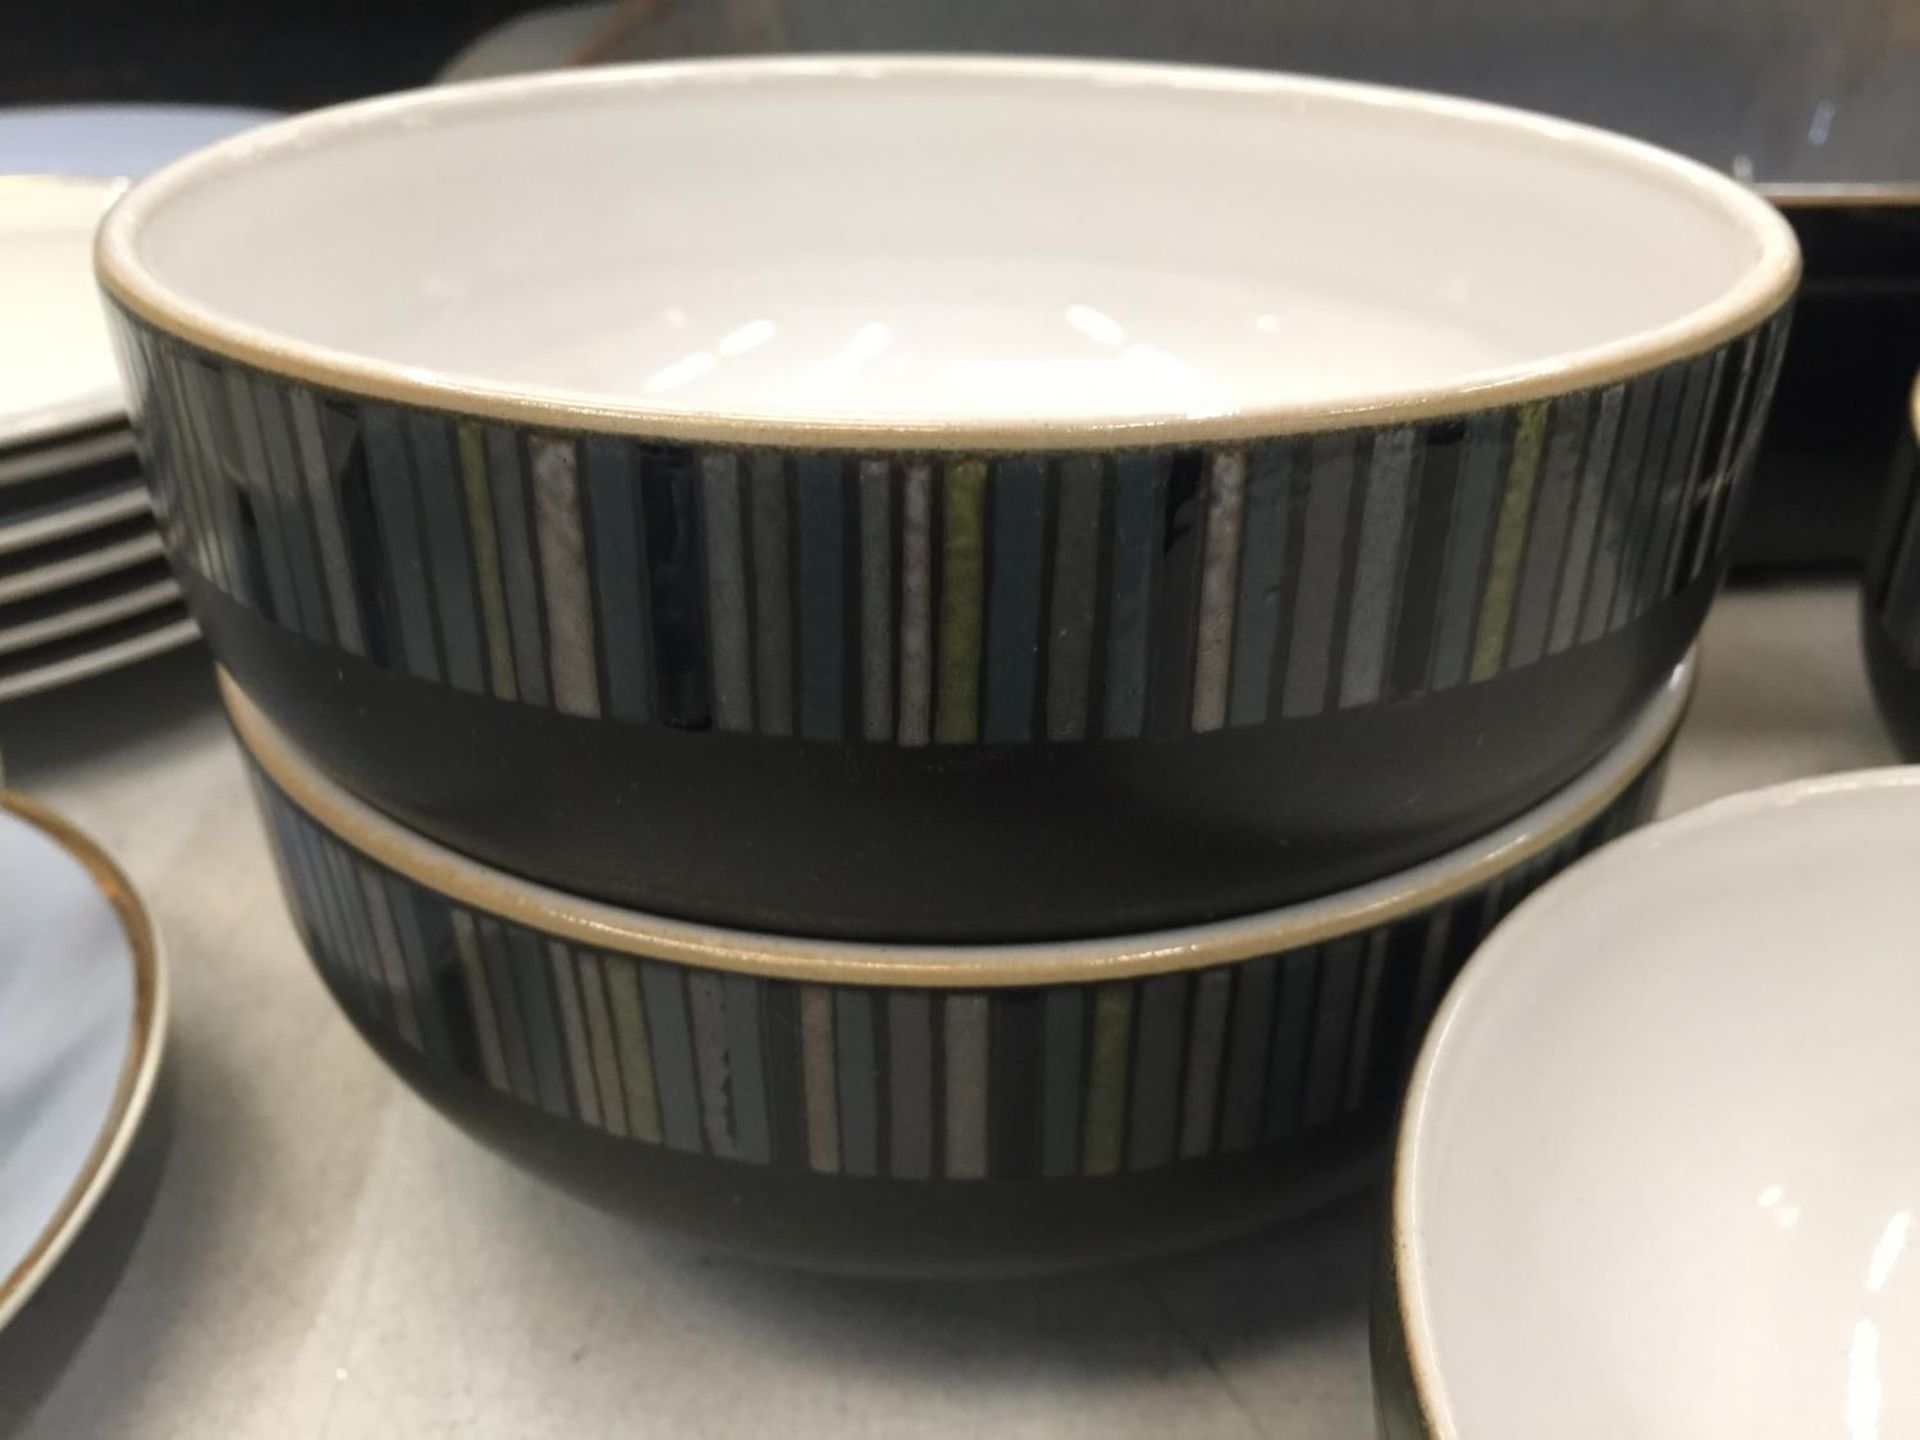 A LARGE QUANTITY OF DENBY 'JET STRIPES' DINNER WARE TO INCLUDE VARIOUS SIZES OF PLATES, BOWLS, - Image 4 of 5